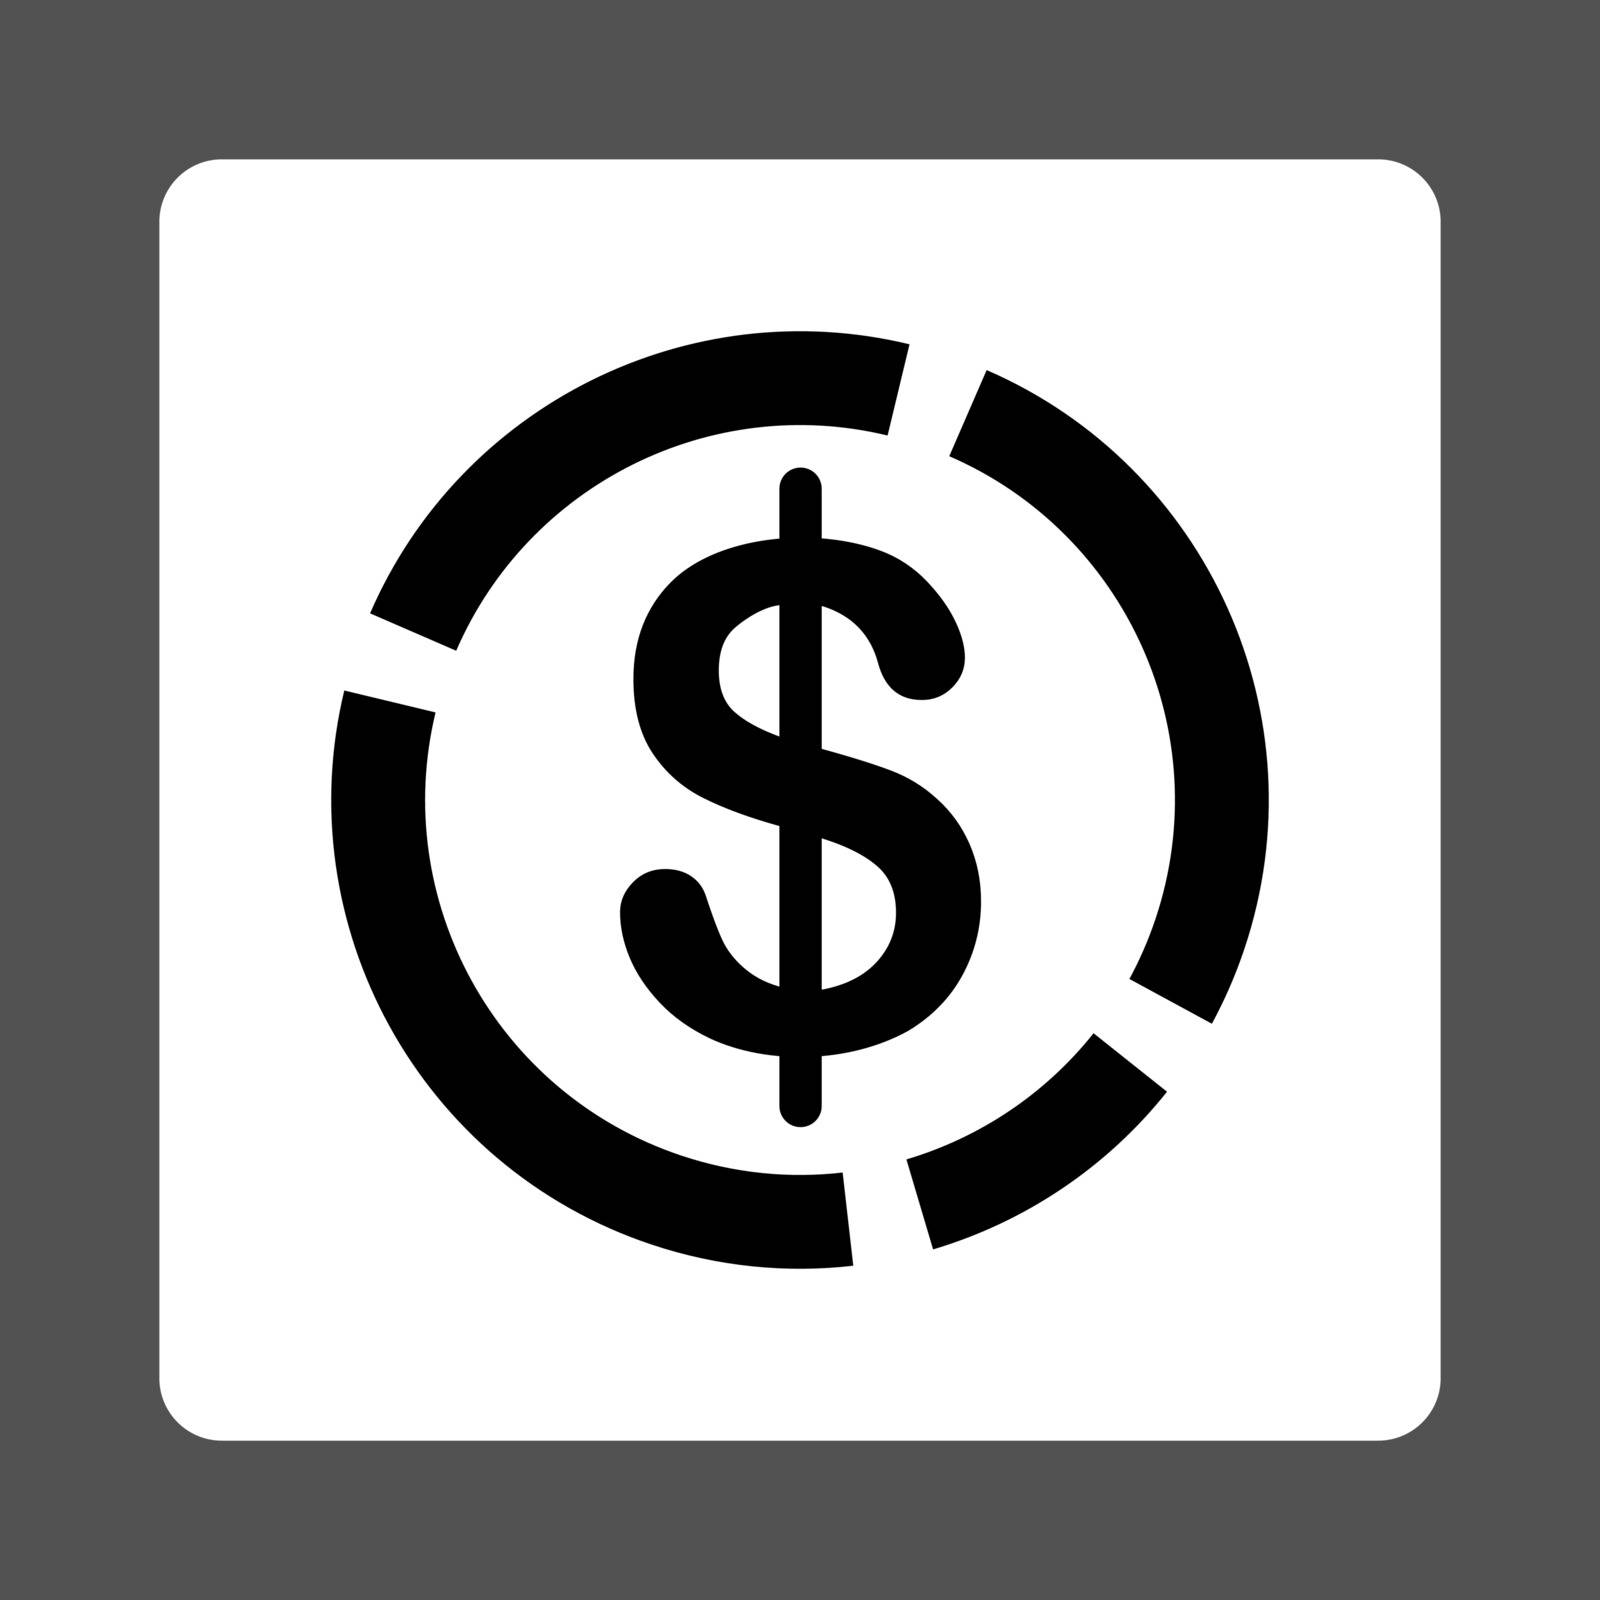 Dollar Diagram vector icon. This flat rounded square button uses black and white colors and isolated on a gray background.